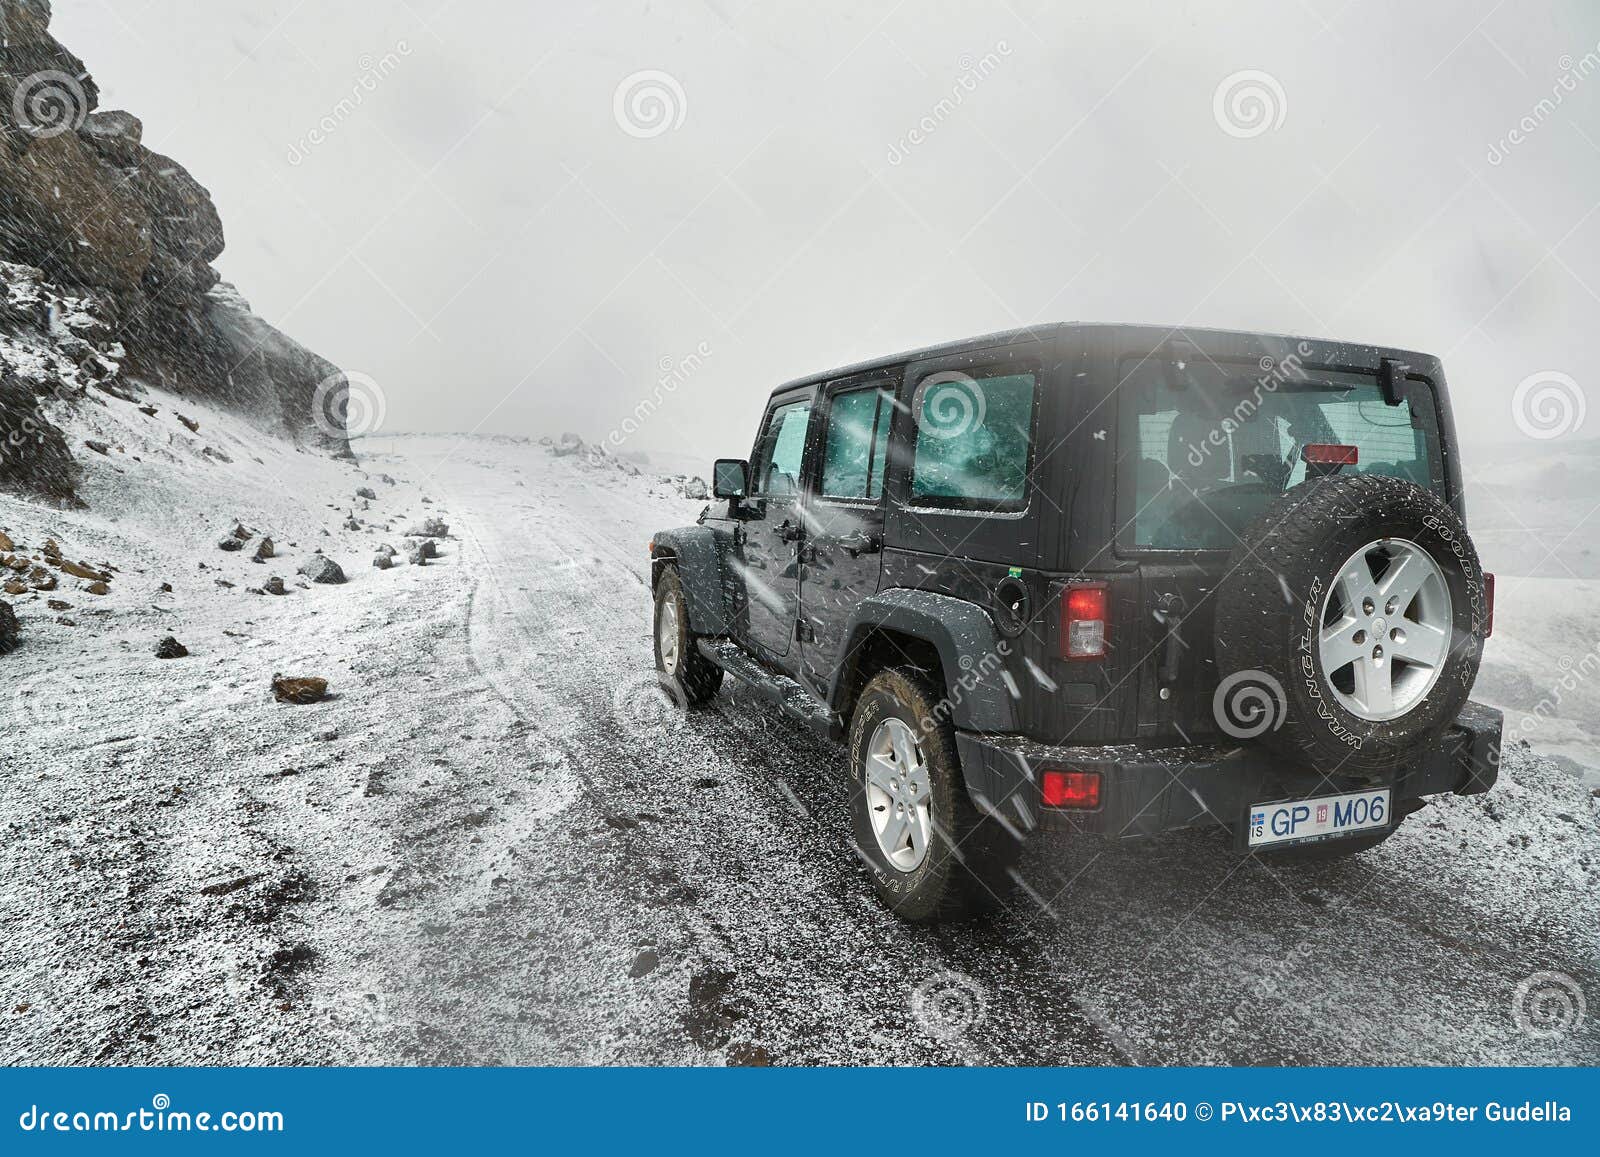 Jeep Wrangler on Icelandic Terrain with Snow Editorial Image - Image of jeep,  leisure: 166141640